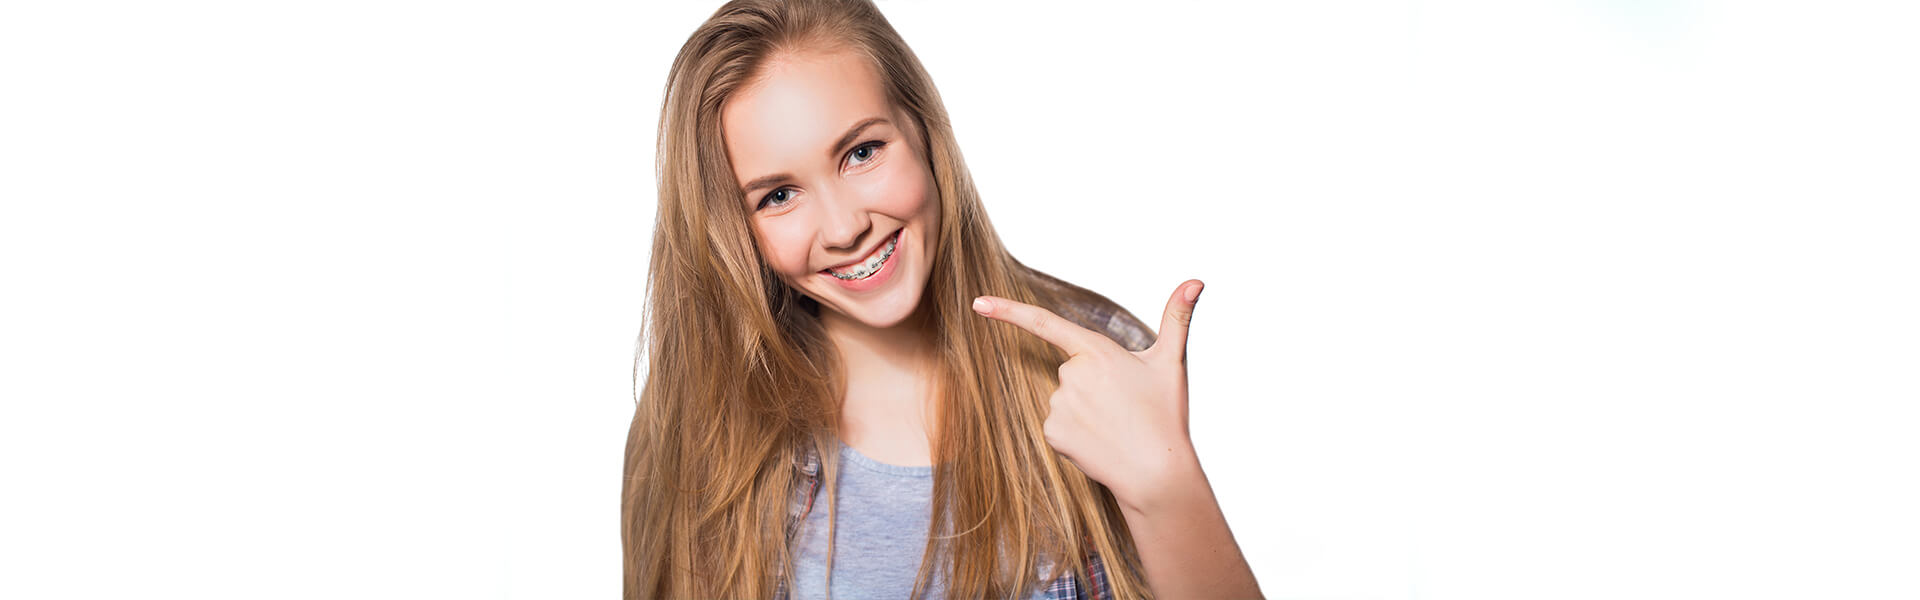 Orthodontic Treatment Can Provide a Winning Smile 